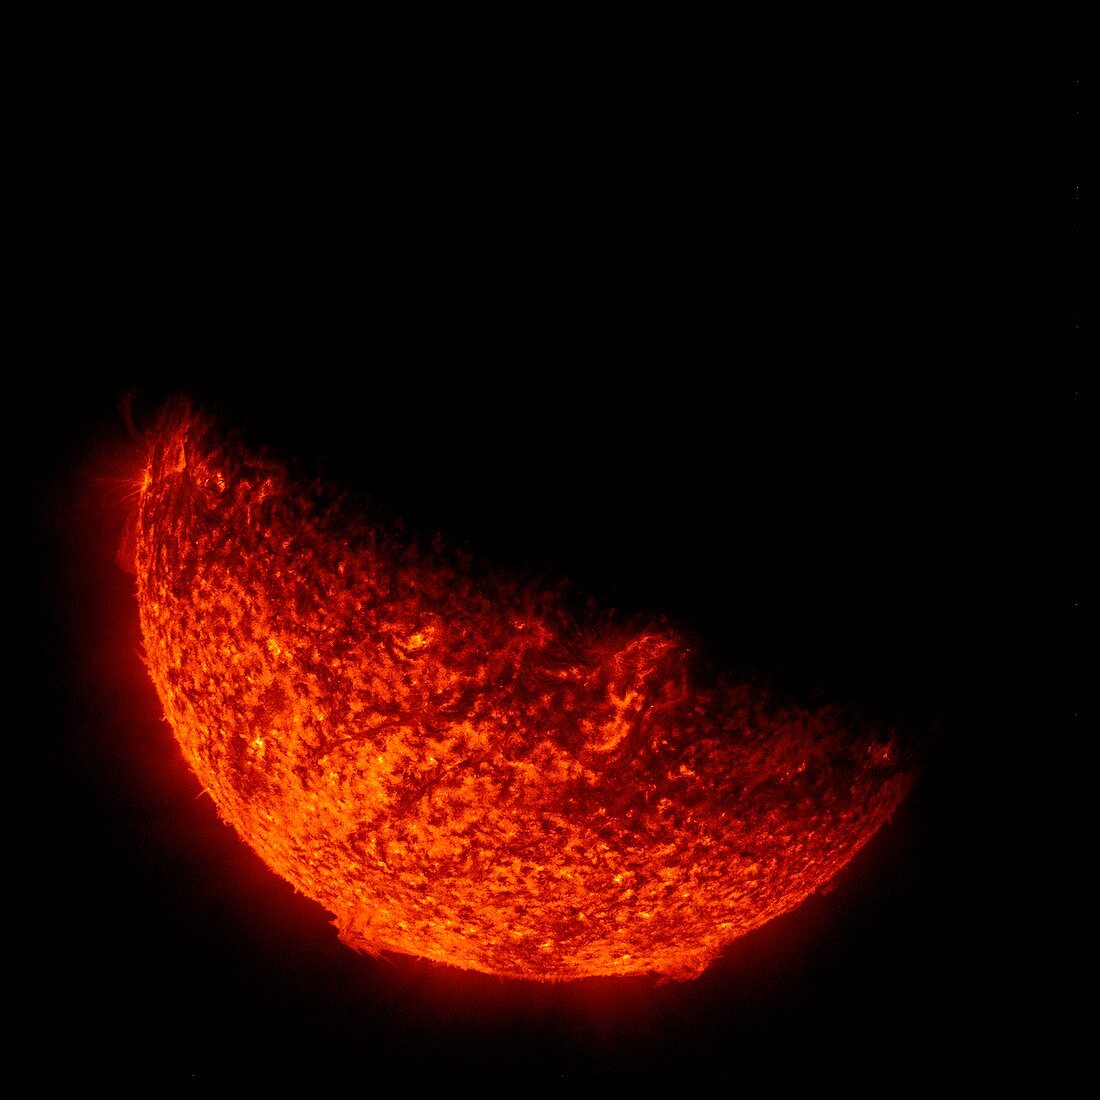 Sun eclipsed by Earth from the SDO